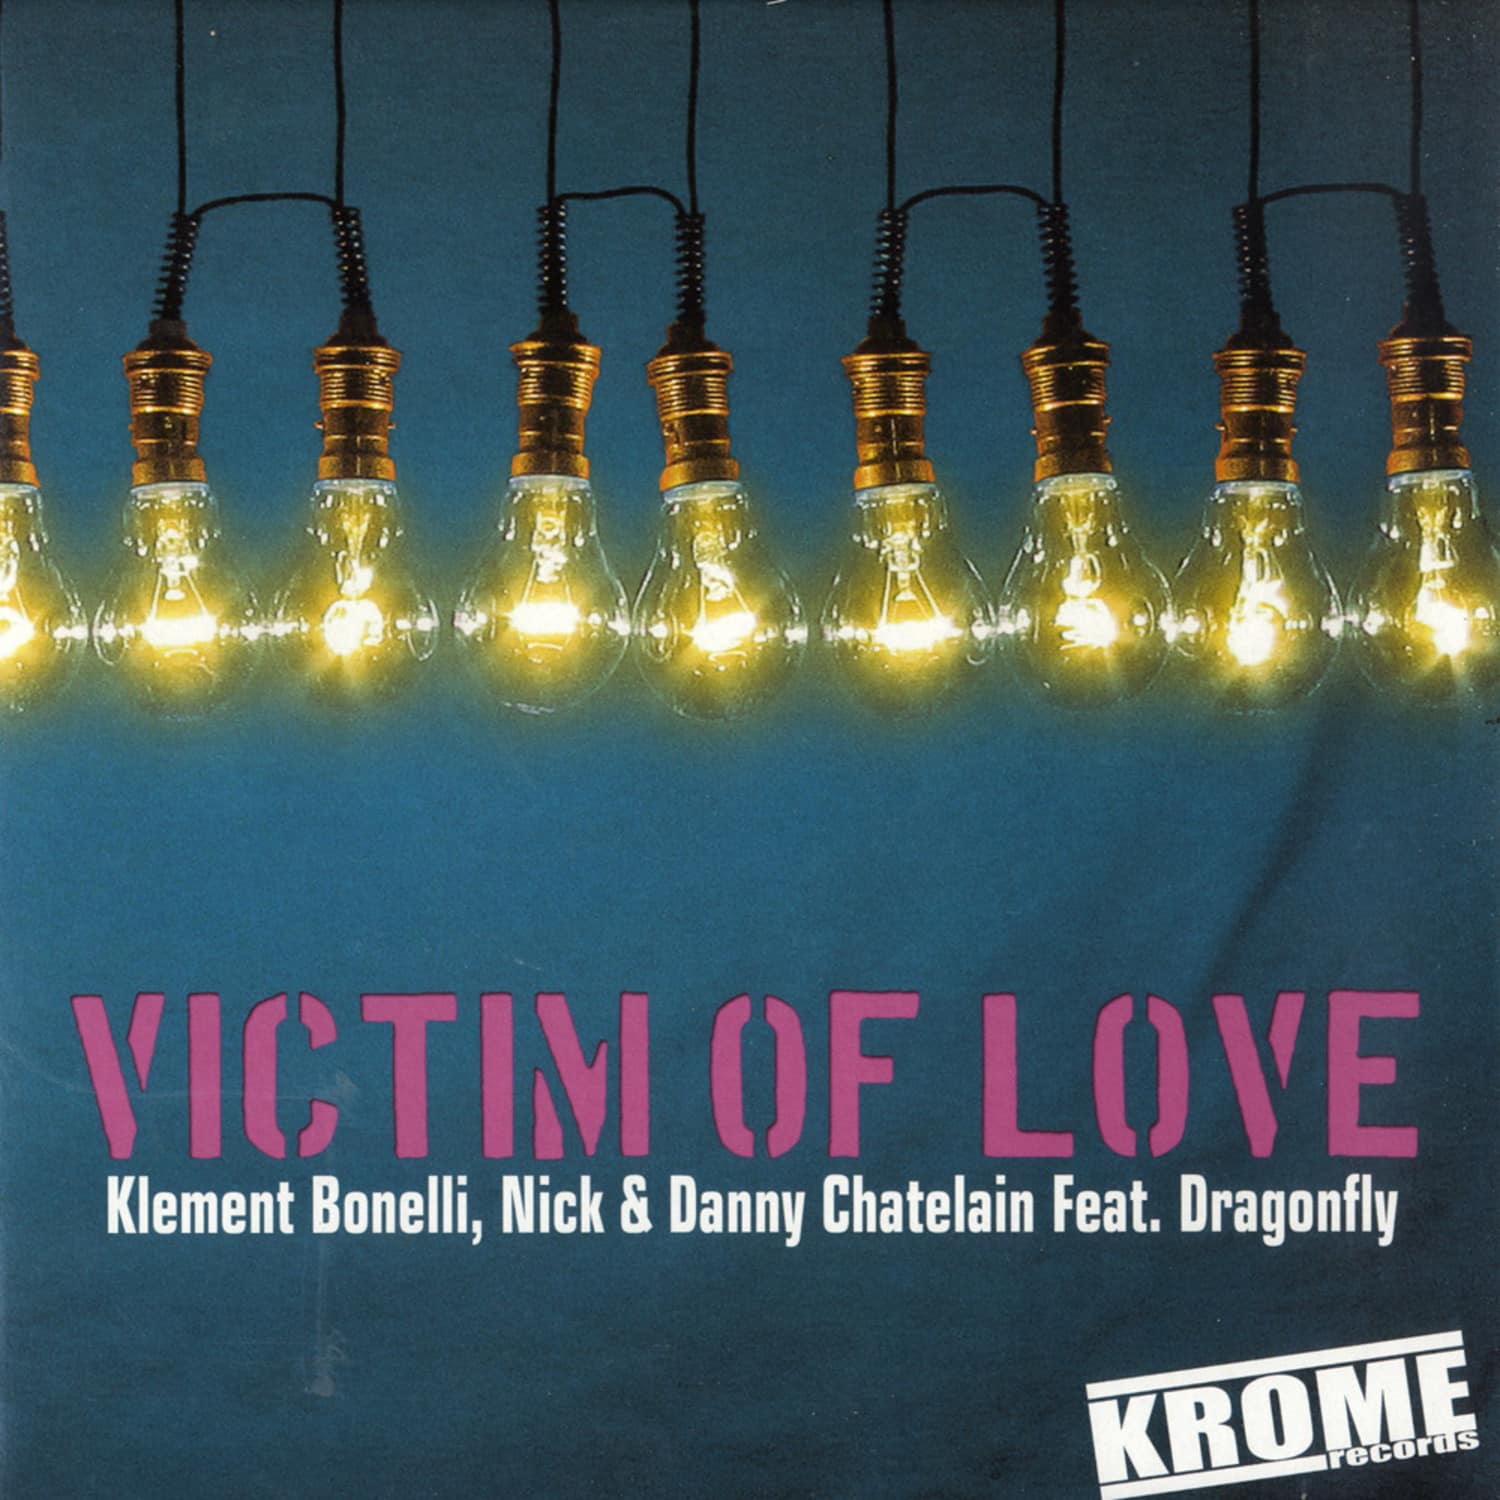 Klement Bonelli, Nick & Danny Chatelein Feat. Dragonfly - VICTIM OF LOVE